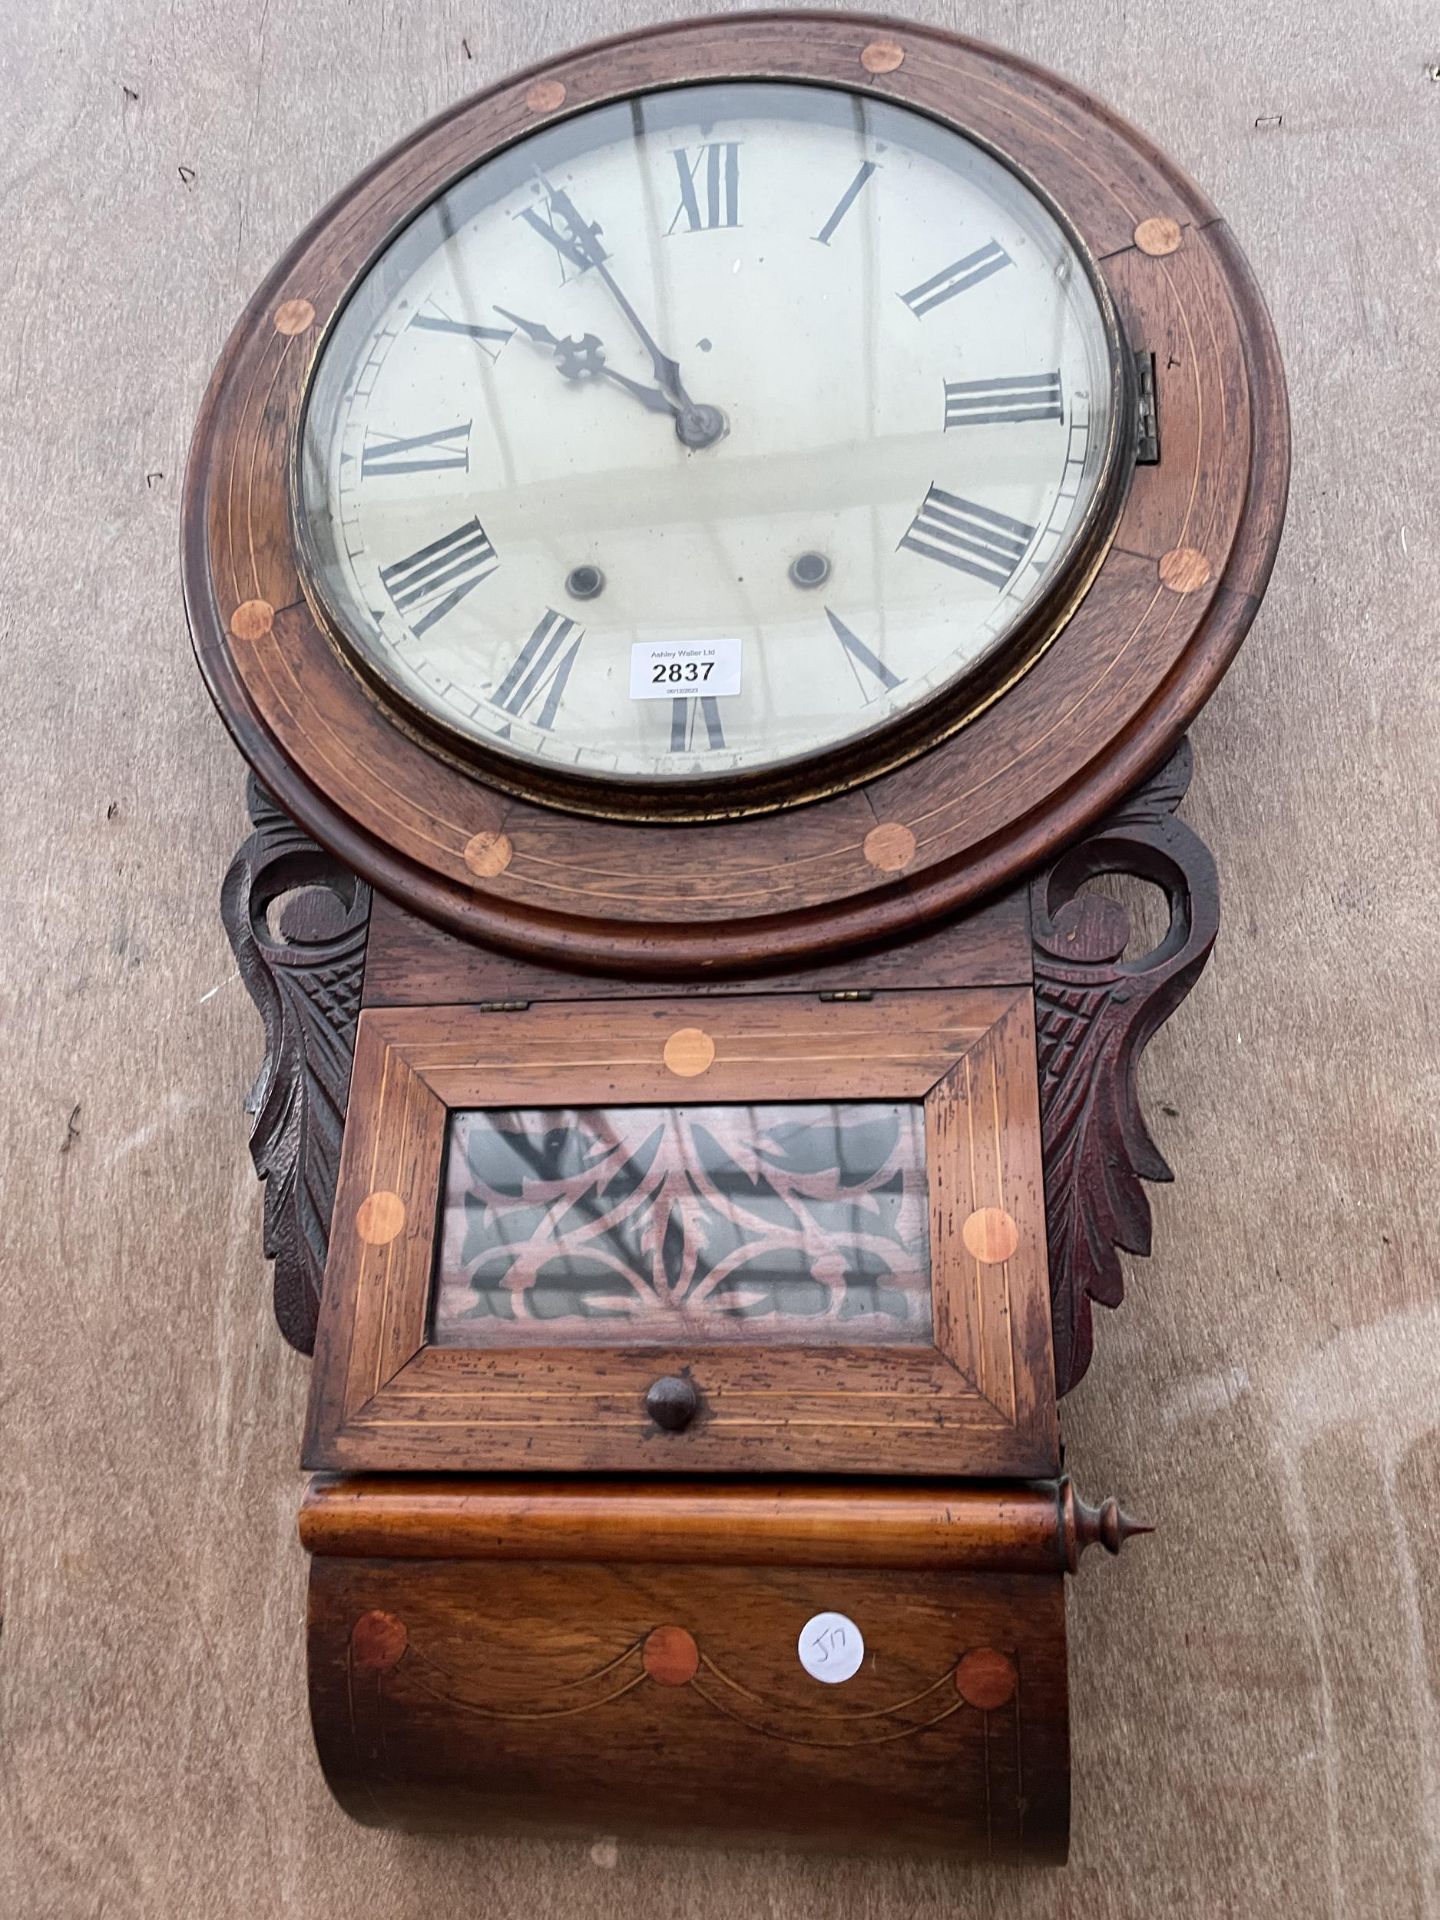 A VICTORIAN EIGHT-DAY WALL CLOCK WITH ENAMEL DIAL AND ROMAN NUMERALS - Image 3 of 4